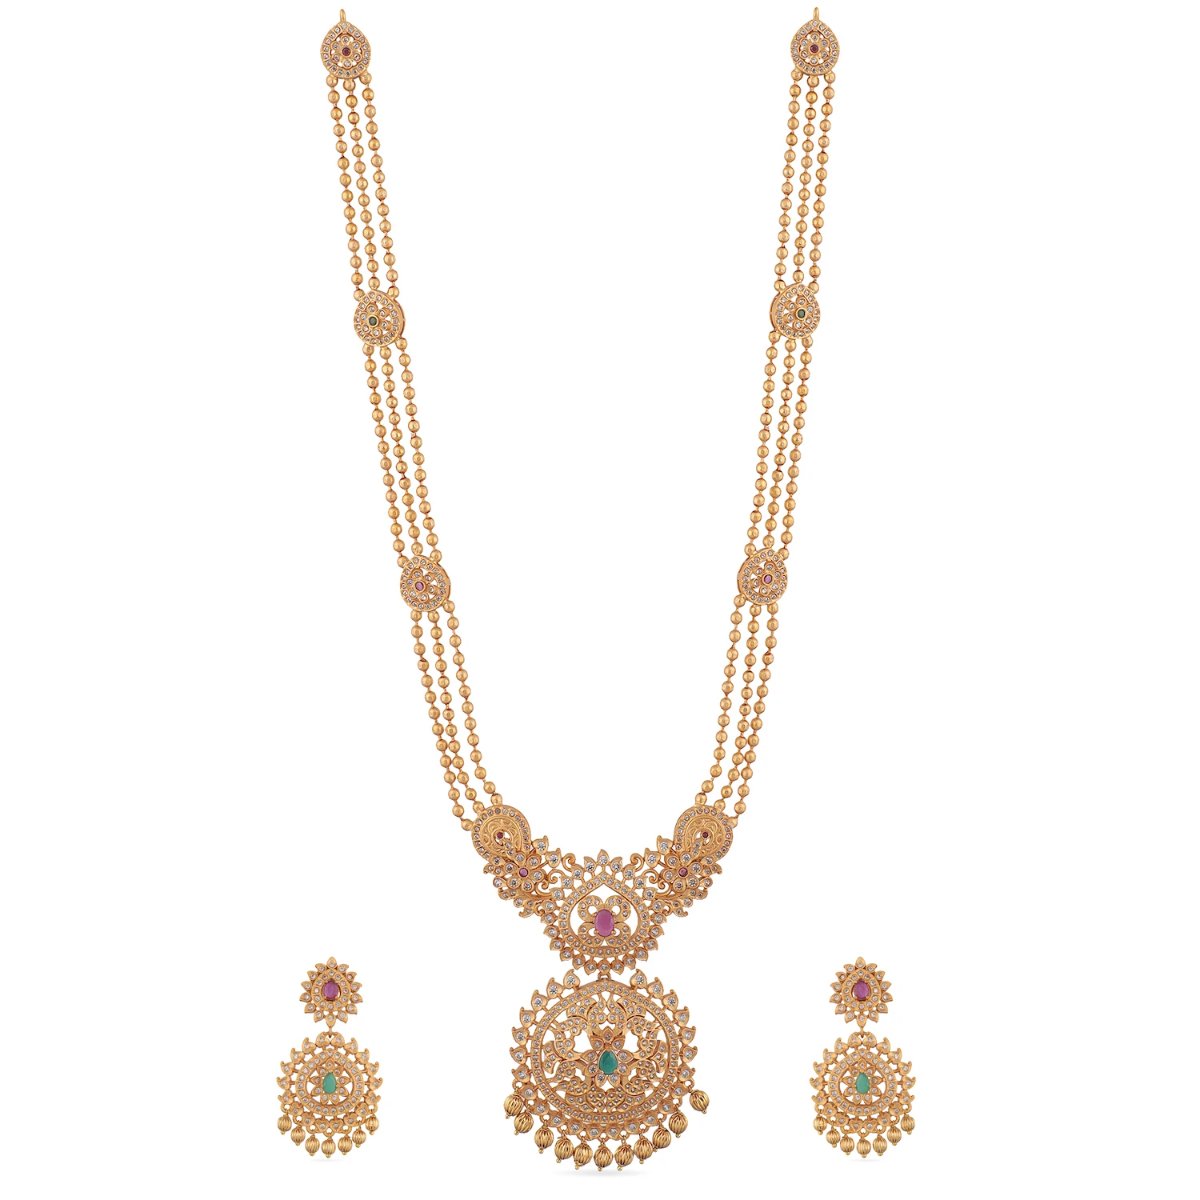 A picture of an Indian artificial necklace set with a gold-toned chain, a floral pendant with green gemstones, and matching earrings.